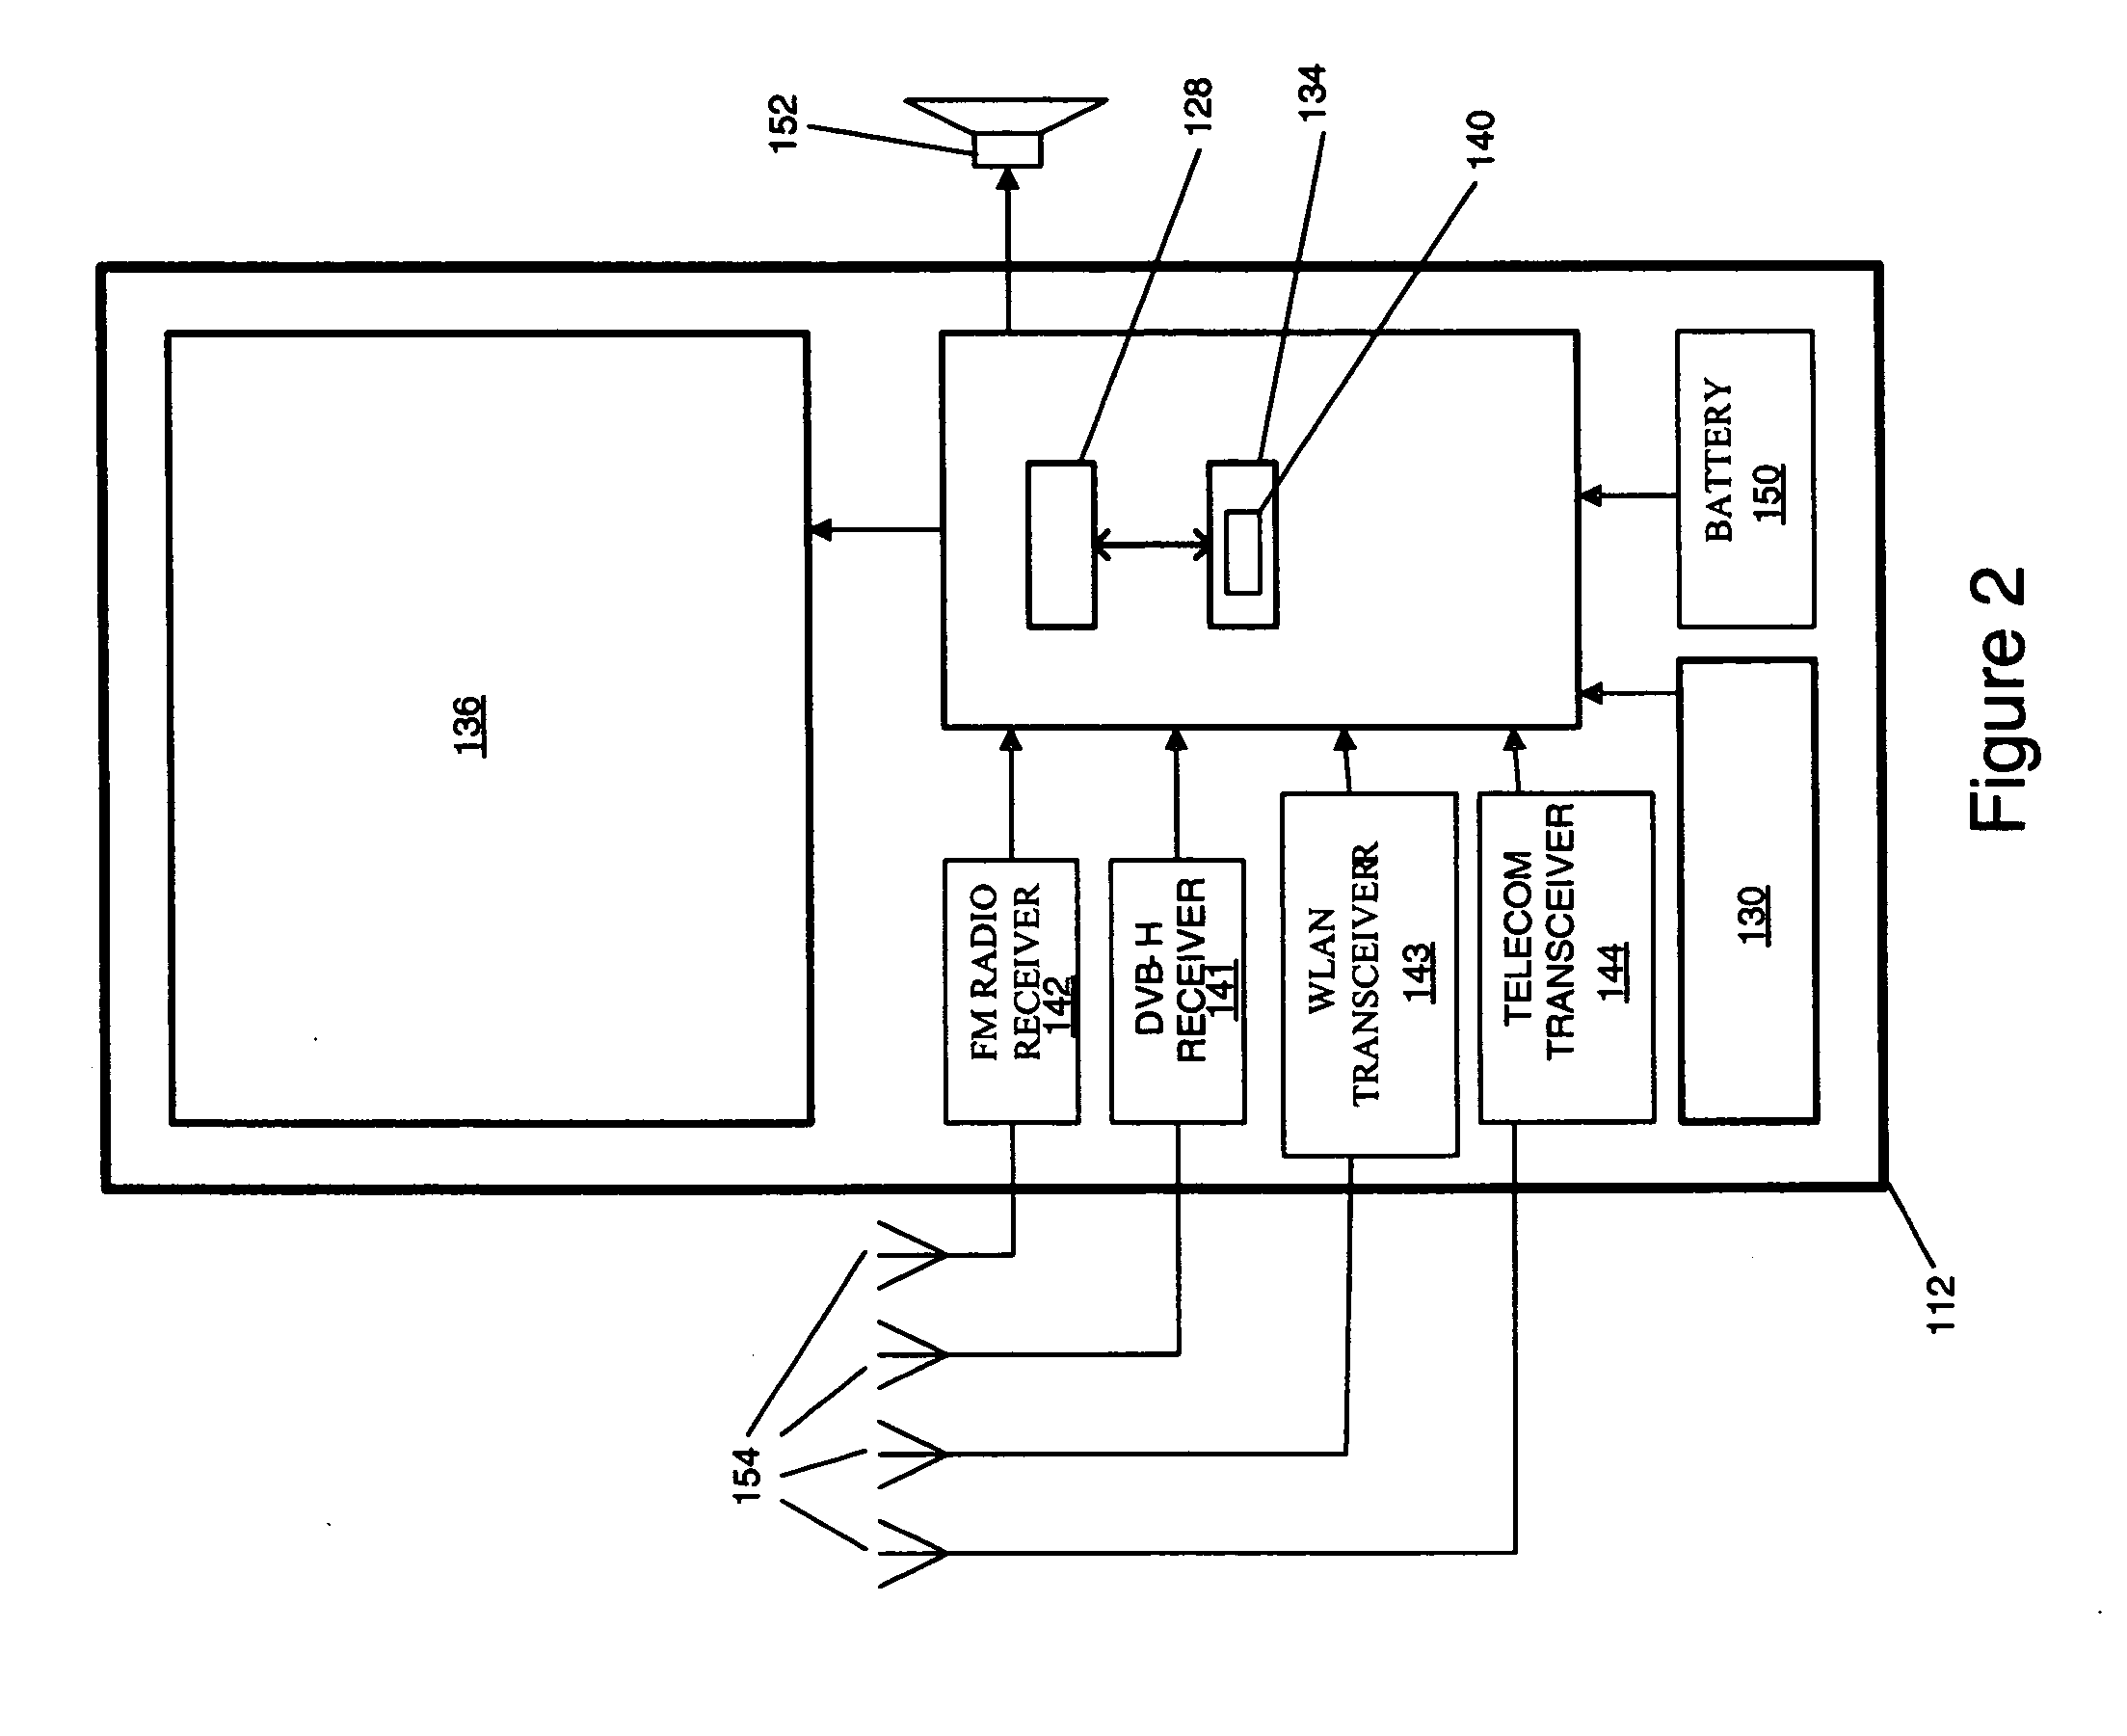 Enhanced electronic service guide container